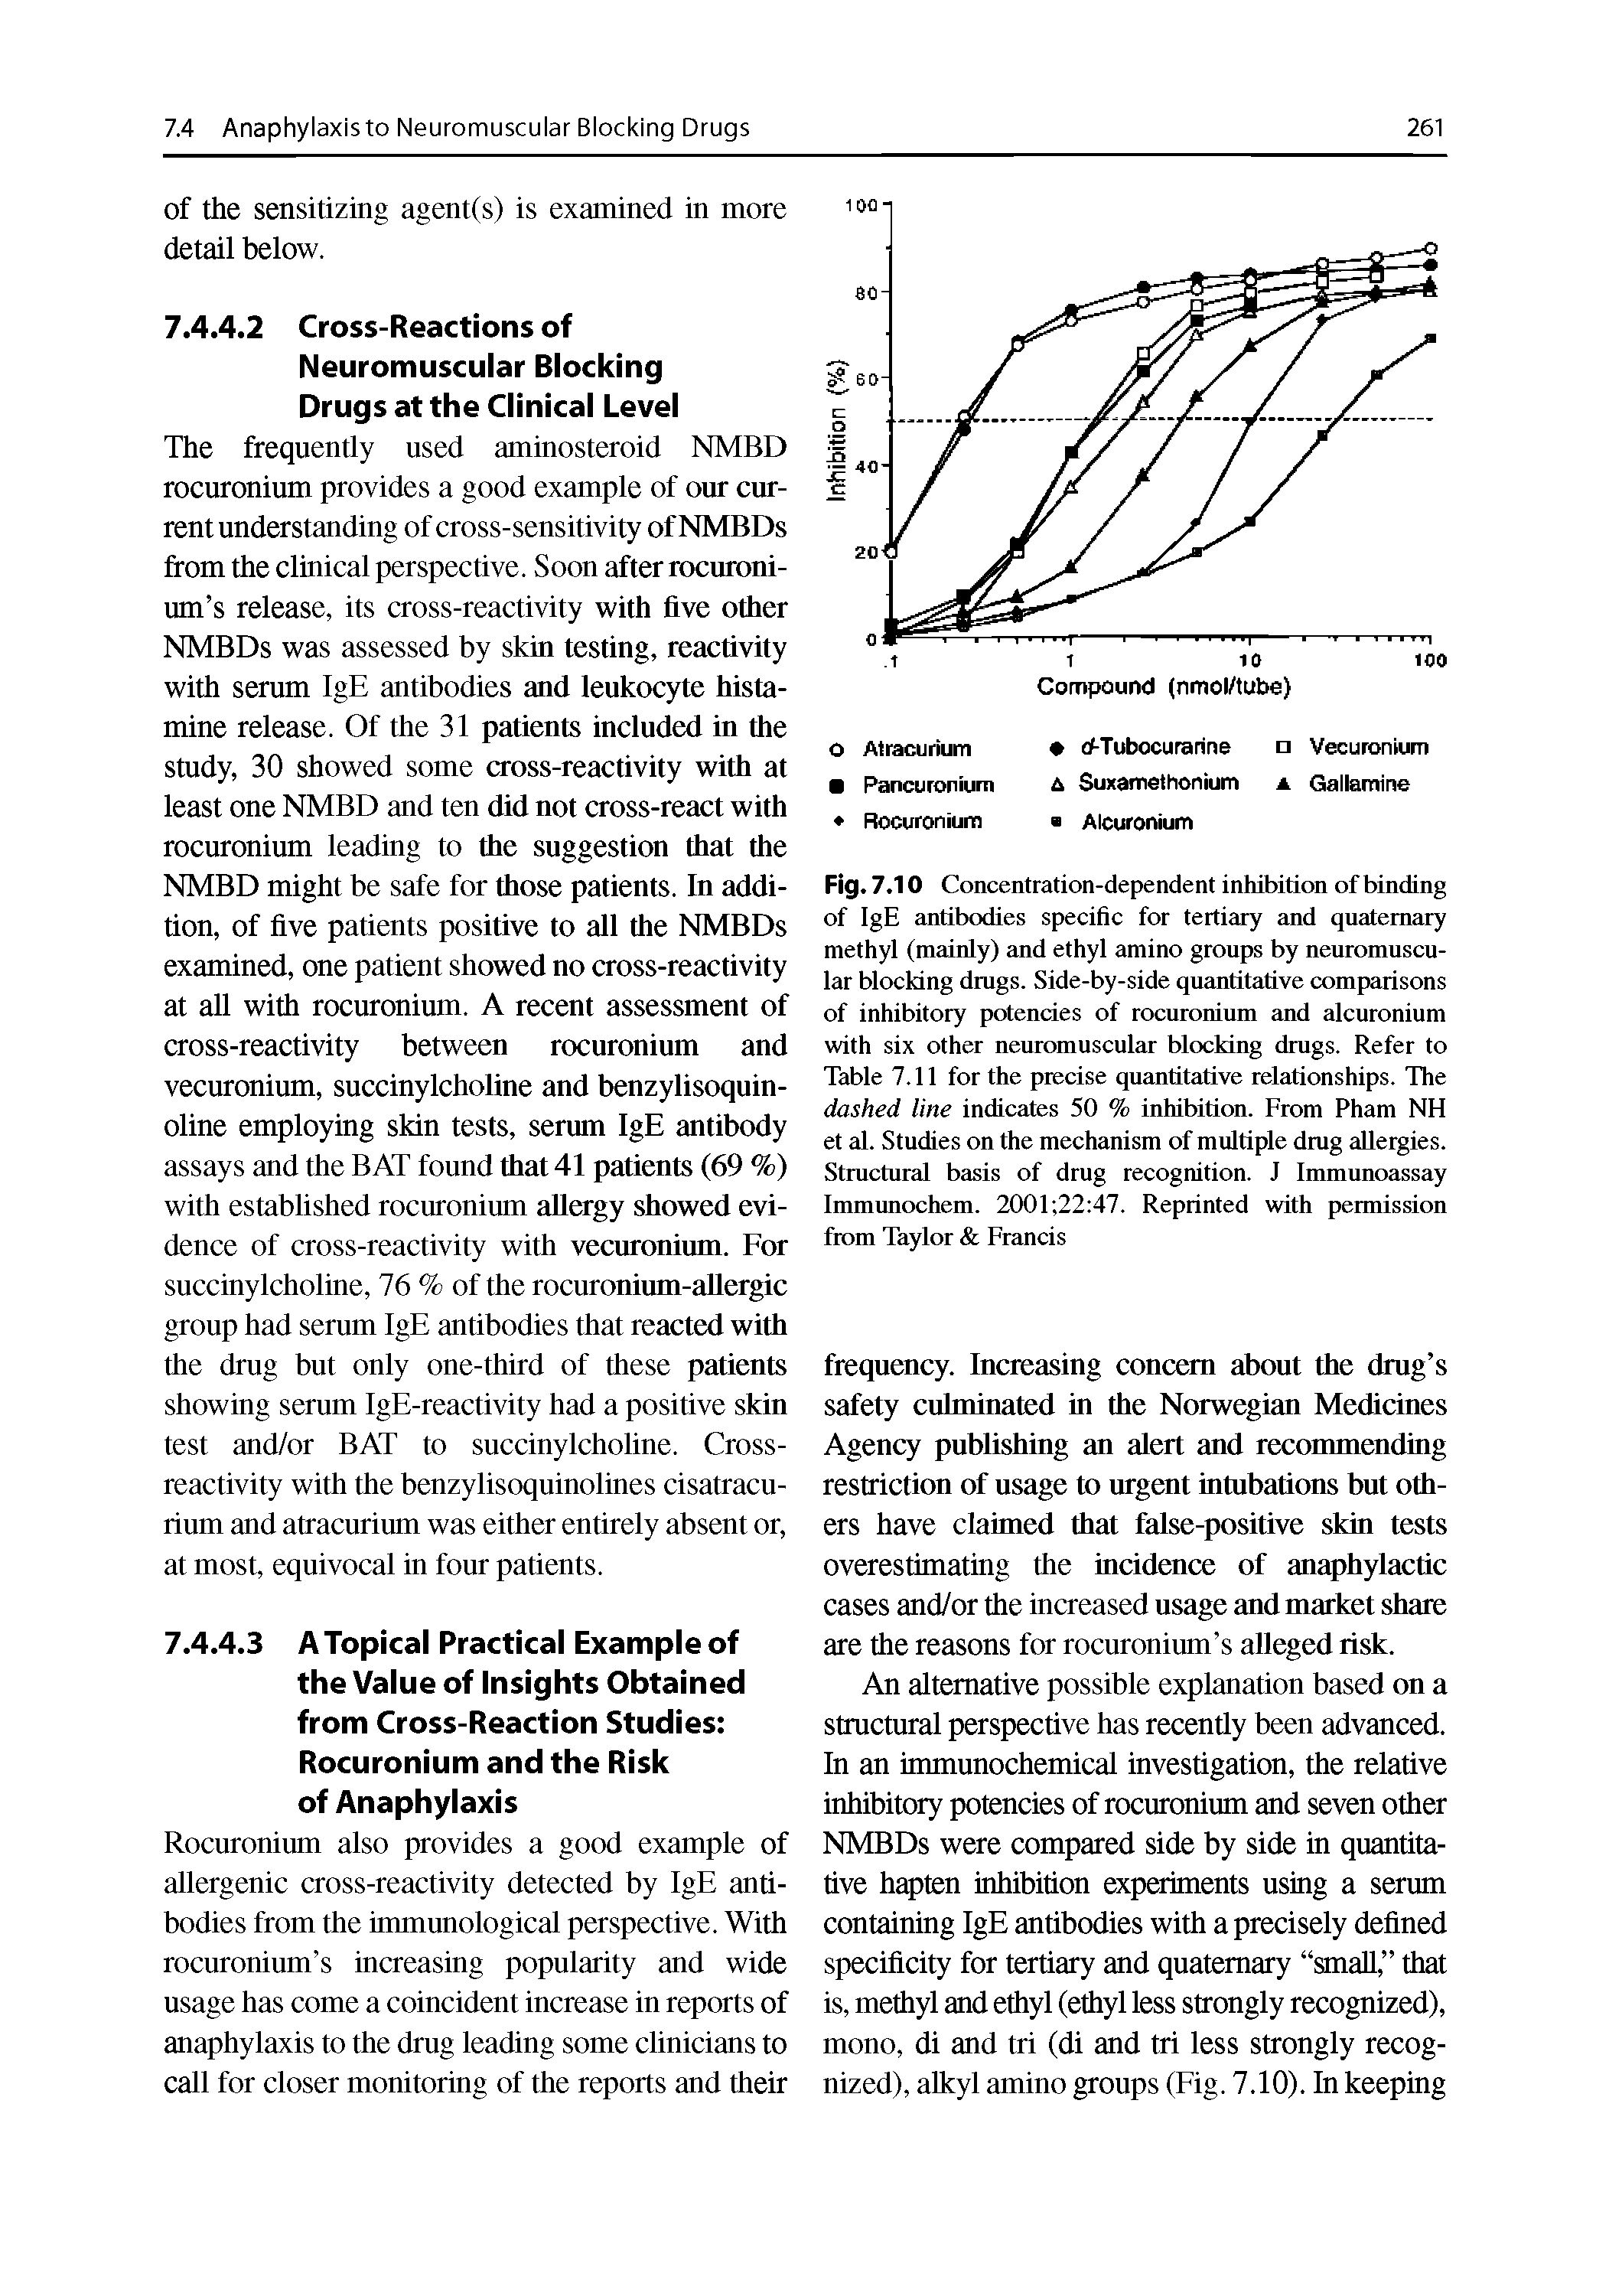 Fig. 7.10 Concentration-dependent inhibition of binding of IgE antibodies specific for tertiary and quaternary methyl (mainly) and ethyl eunino groups by neuromuscular blocking drugs. Side-by-side quantitative comparisons of inhibitory potencies of rocuronium and alcuronium with six other neuromuscular blocking drugs. Refer to Table 7.11 for the precise quantitative relationships. The dashed line indicates 50 % inhibition. From Pham NH et al. Studies on the mechanism of multiple drug allergies. Structural basis of drug recognition. J Immunoassay Immunochem. 2001 22 47. Reprinted with permission from Taylor Francis...